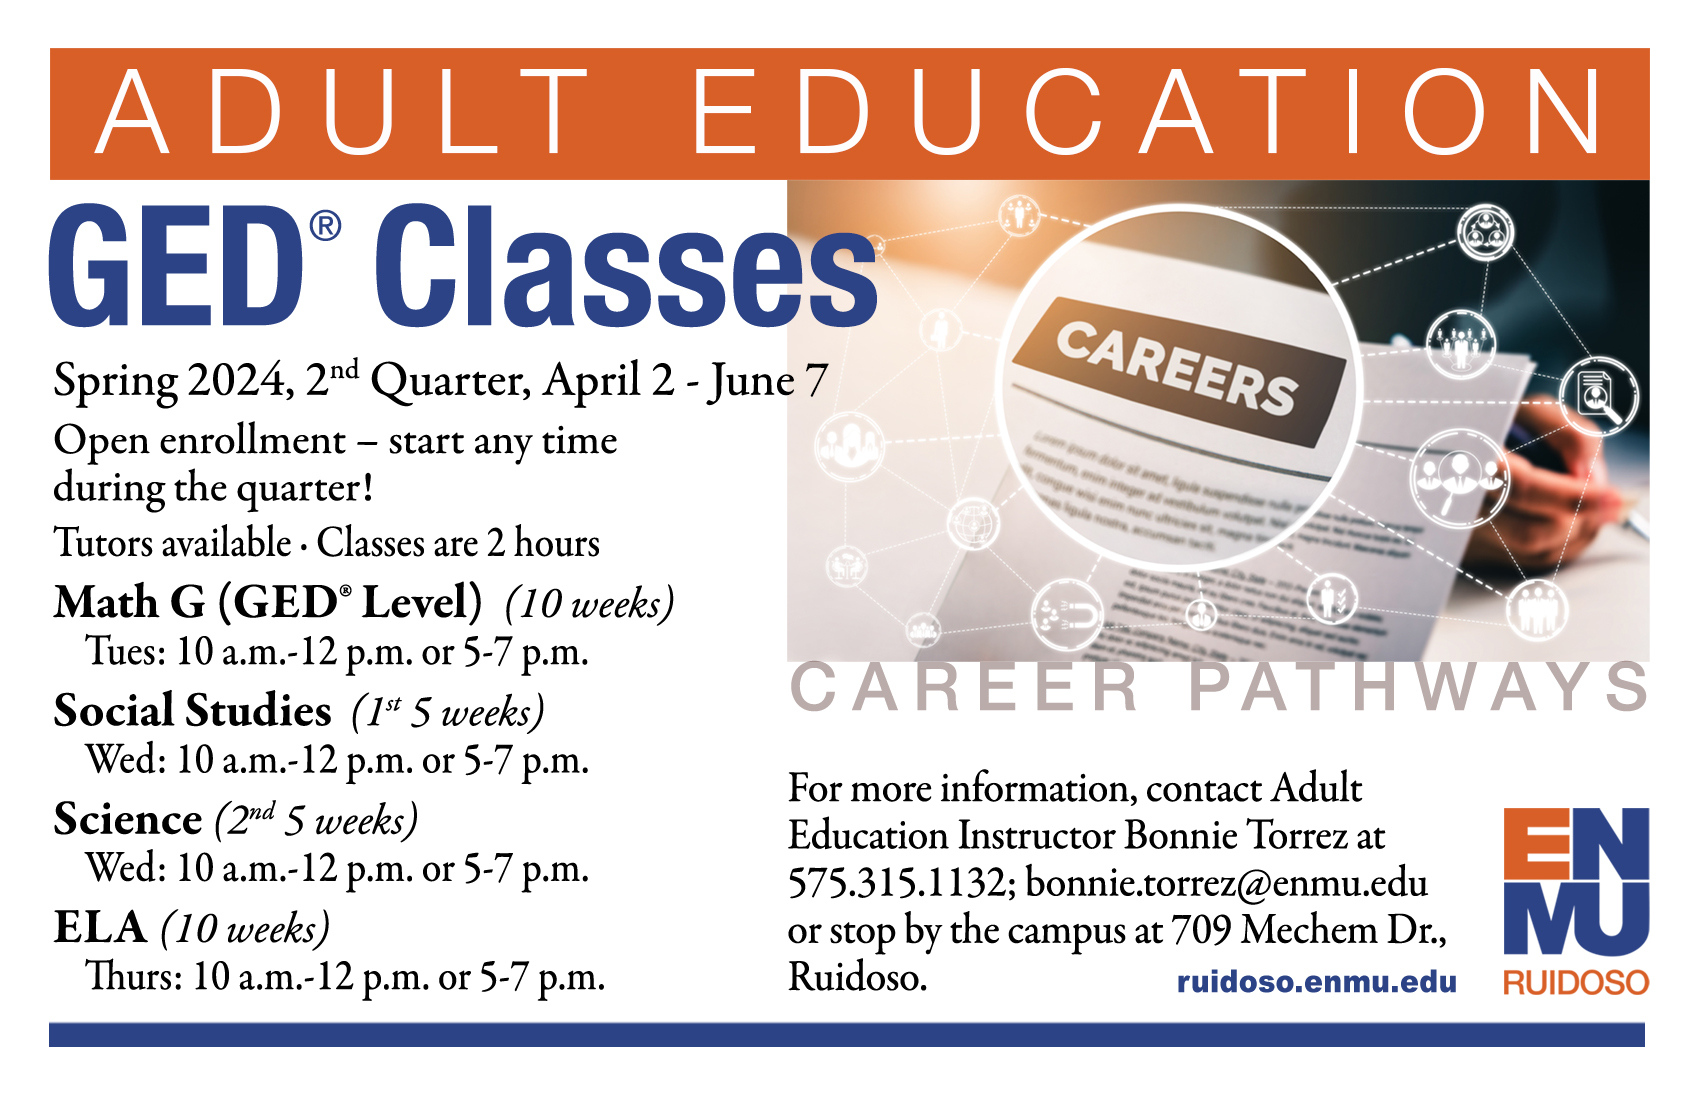 GED® class schedule, 2nd Quarter, Spring 2024 graphic